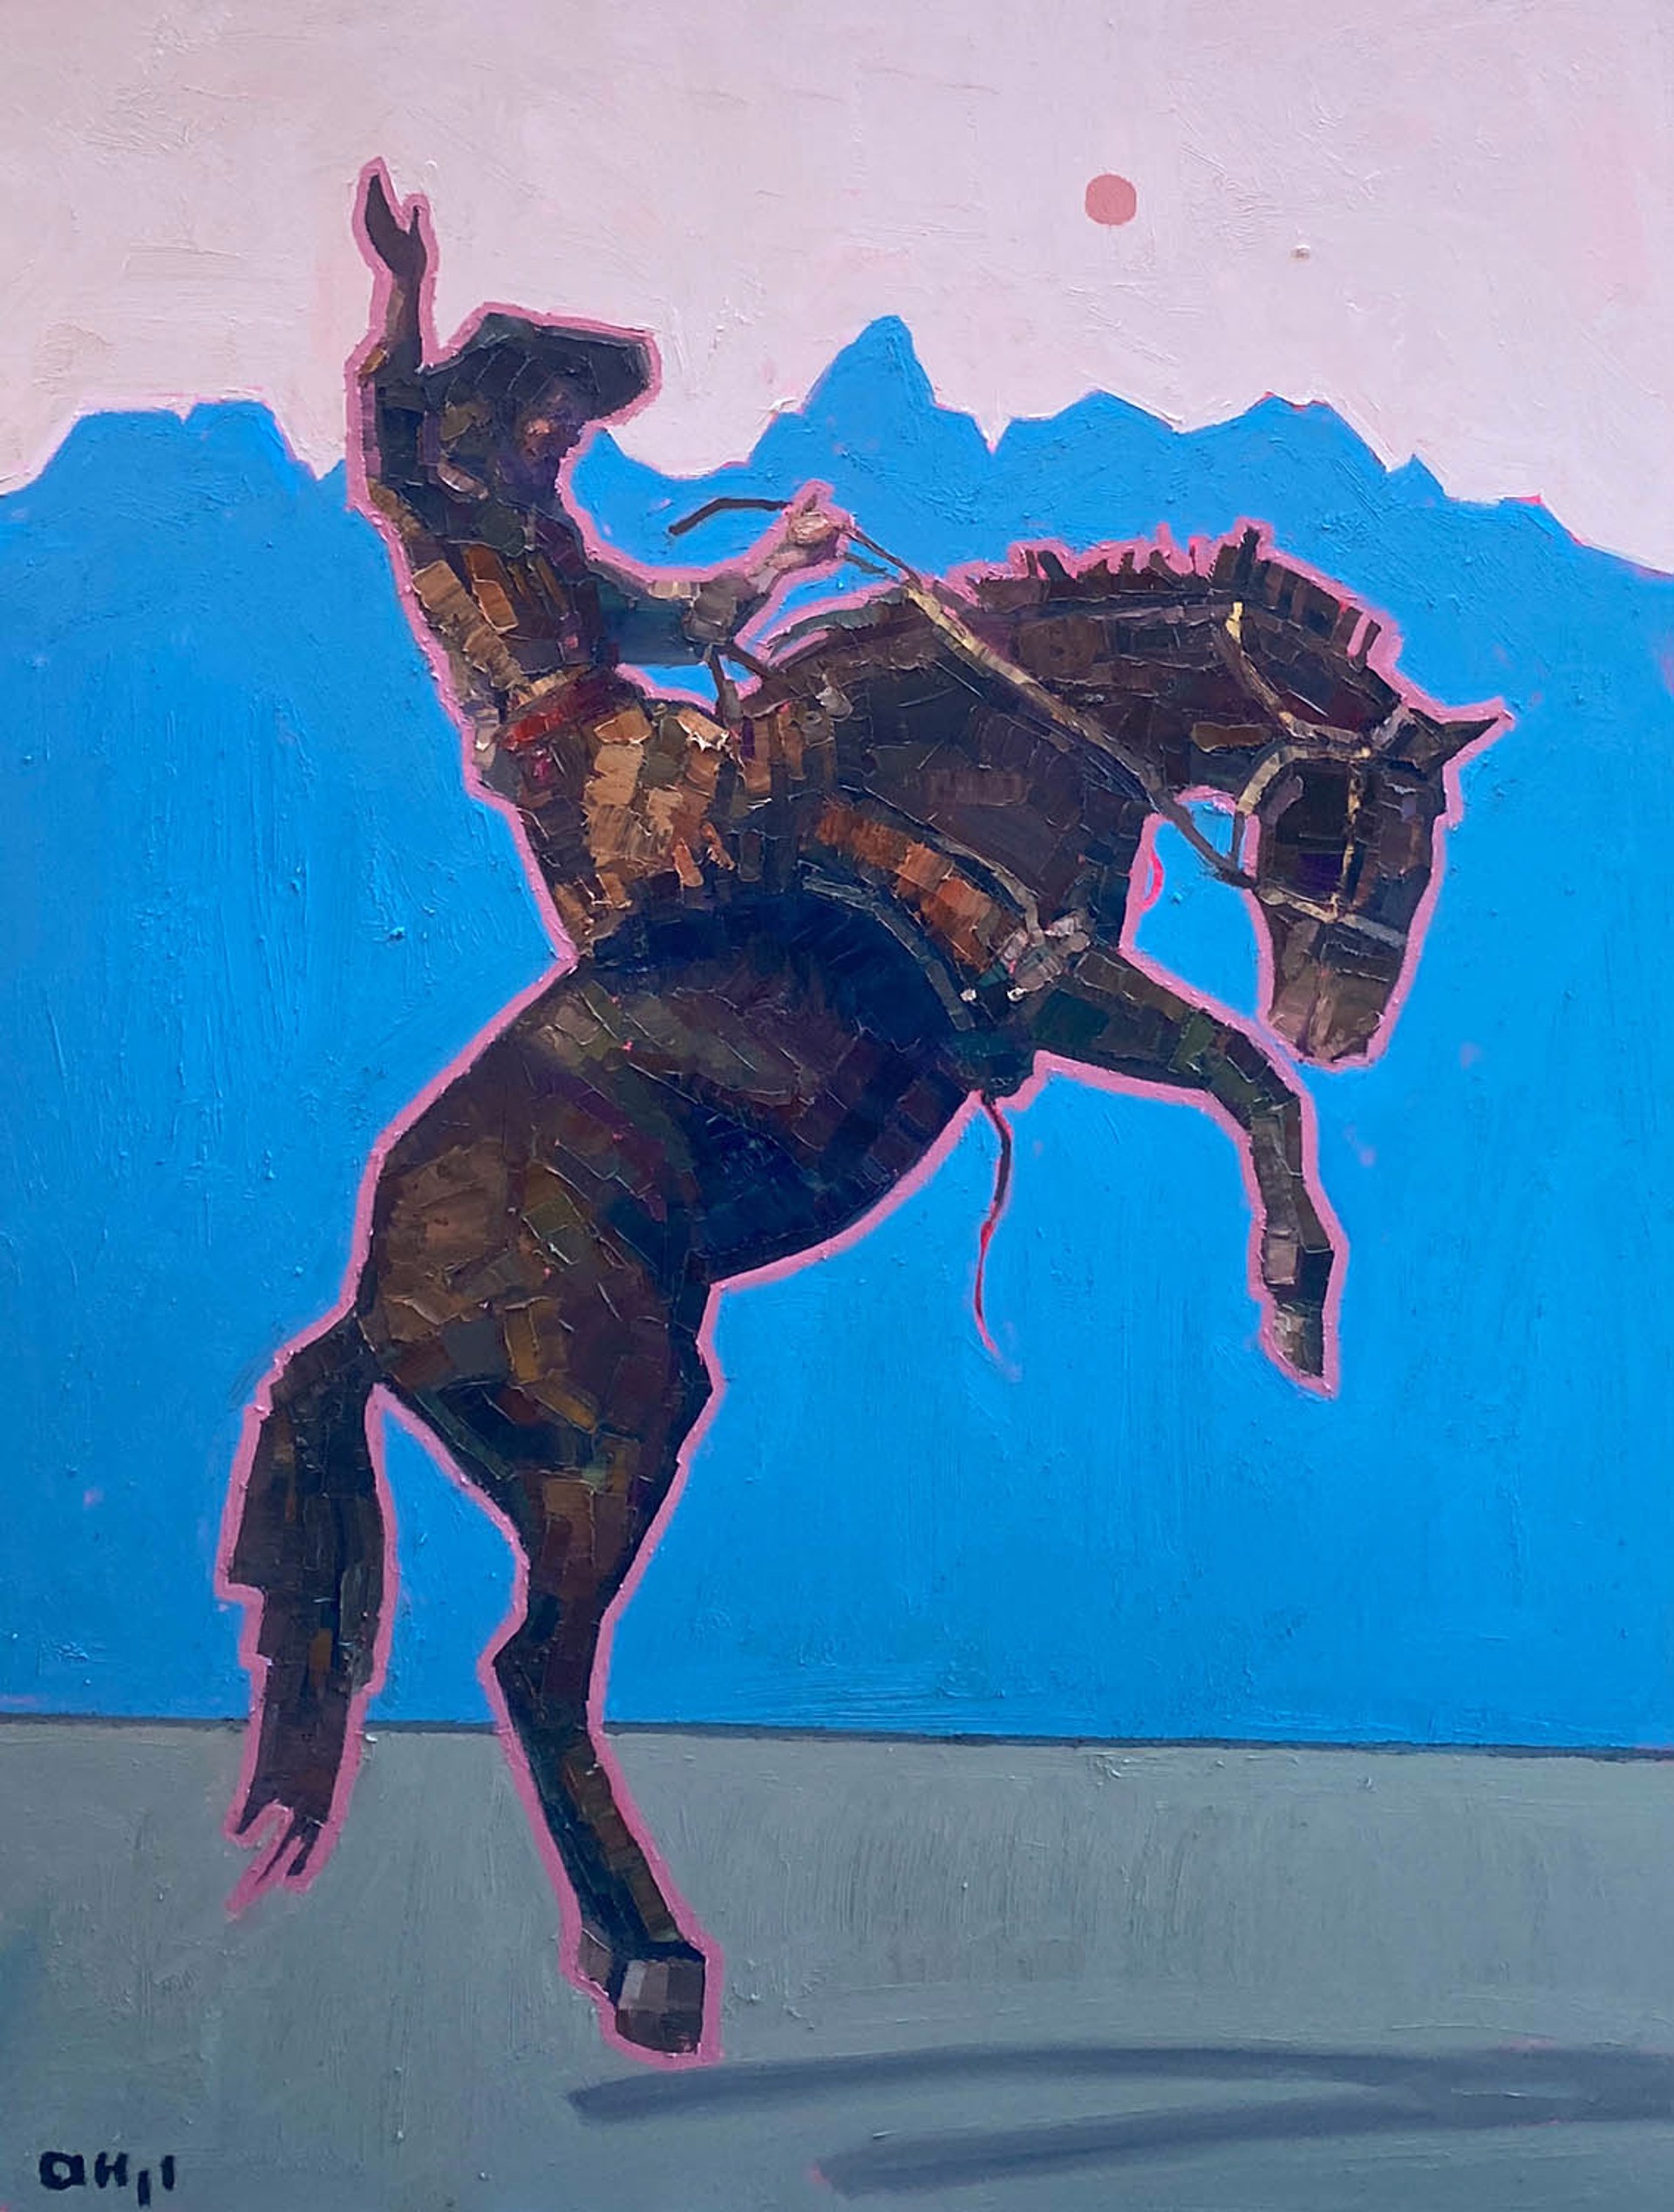 Original Oil Painting By Aaron Hazel Featuring A Trick Rider On Horseback With Teton Silhouette In The Background